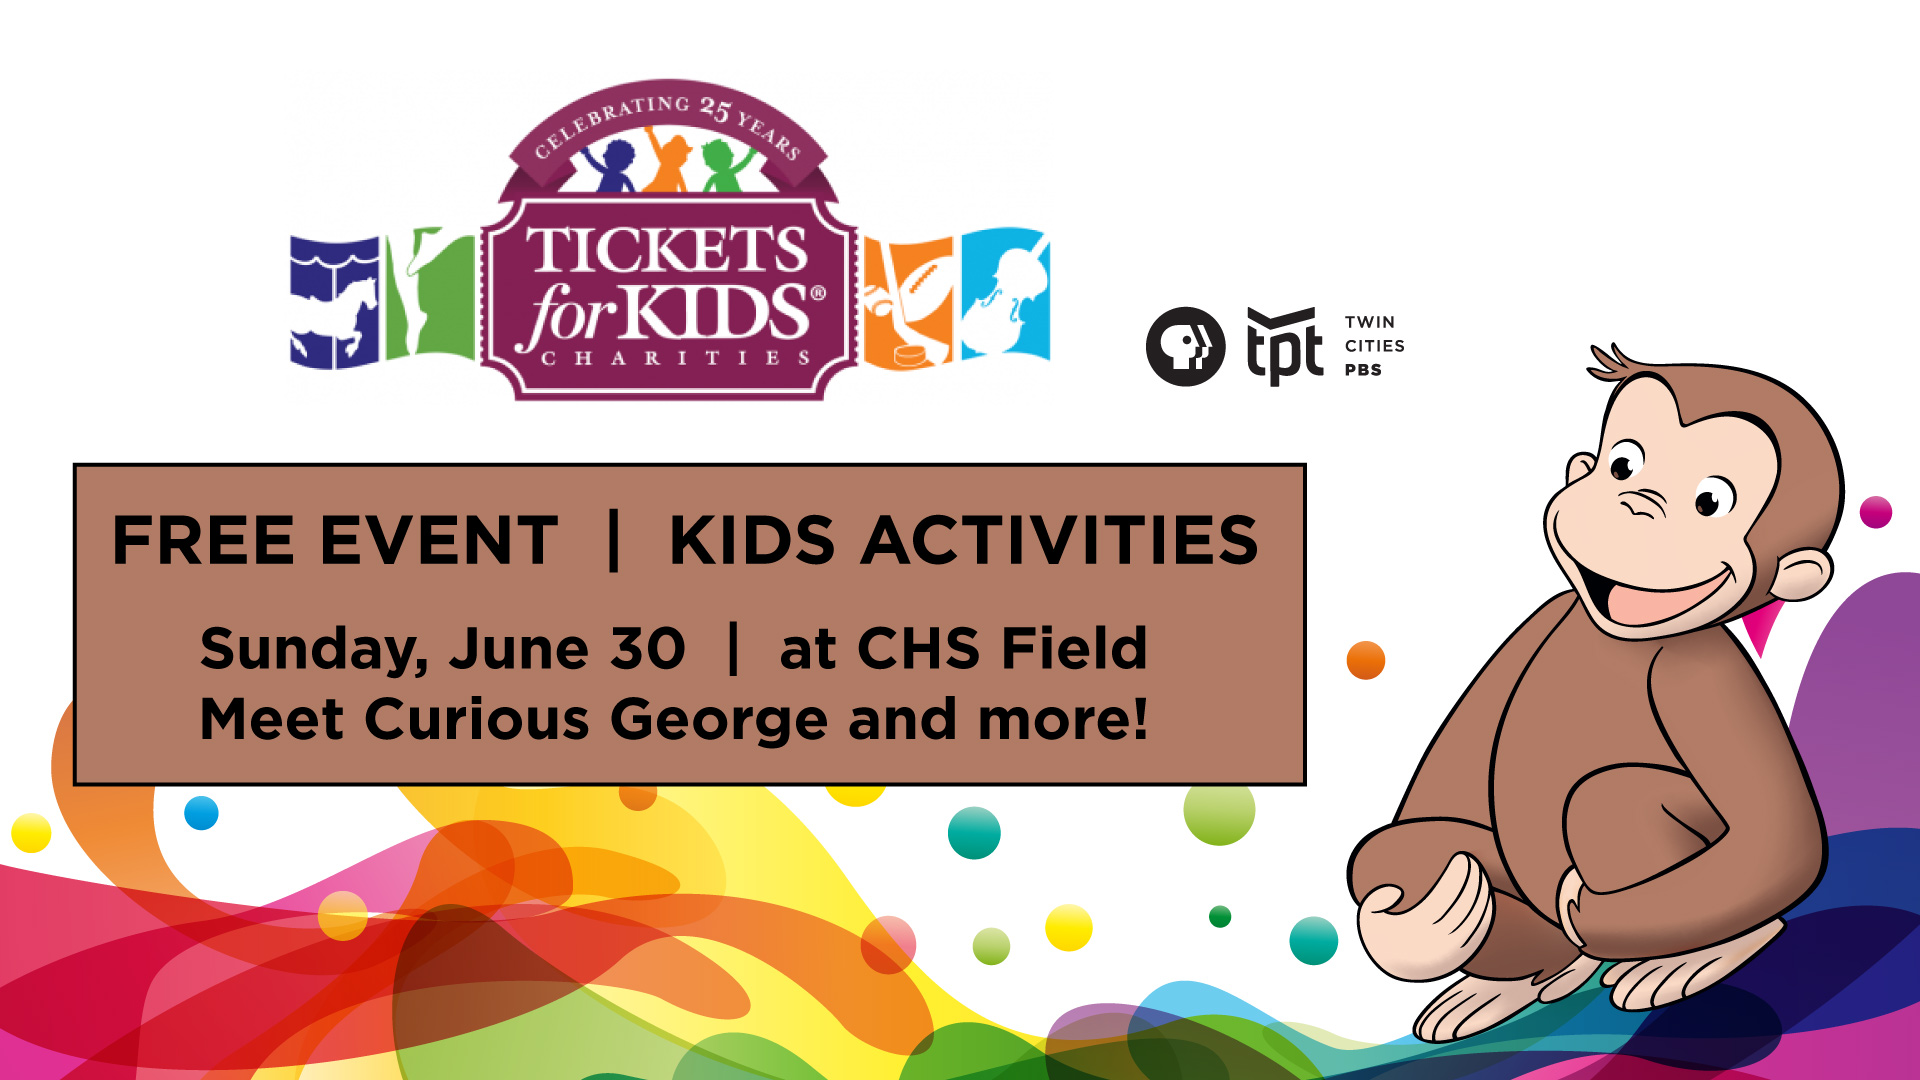 Tickets for Kids at CHS Field